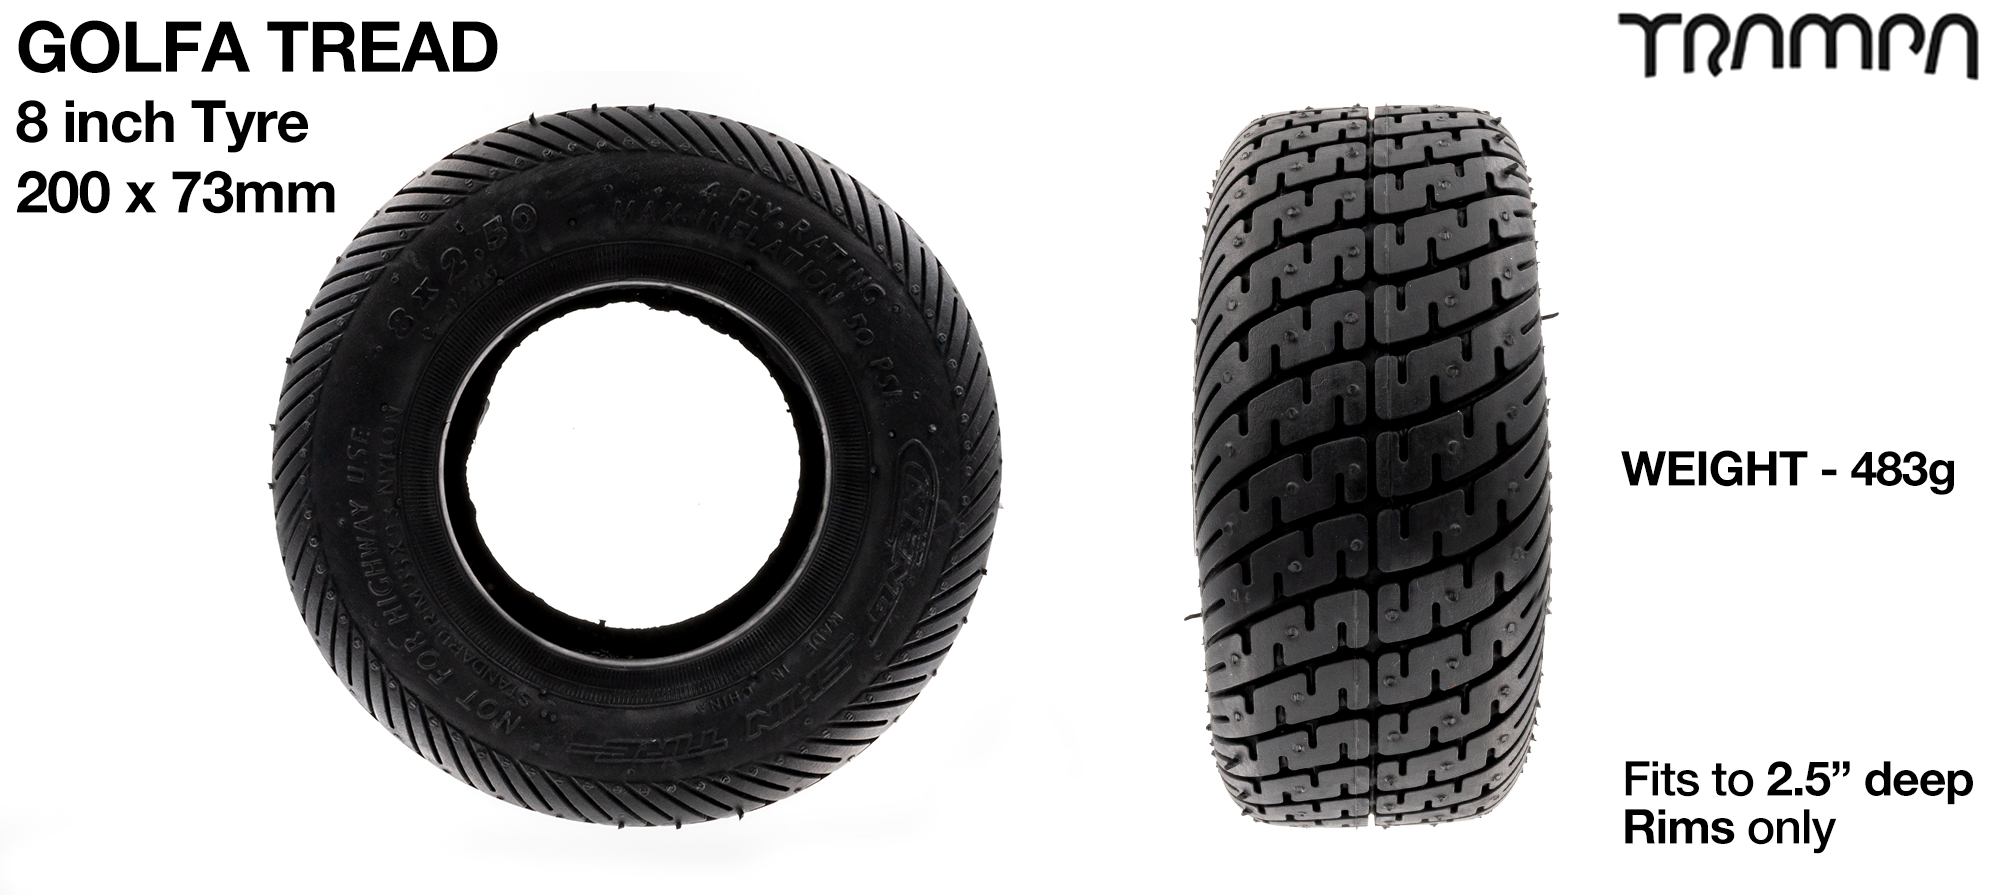 8 Inch GOLFA TYRE BLACK - FRONT (+£20)